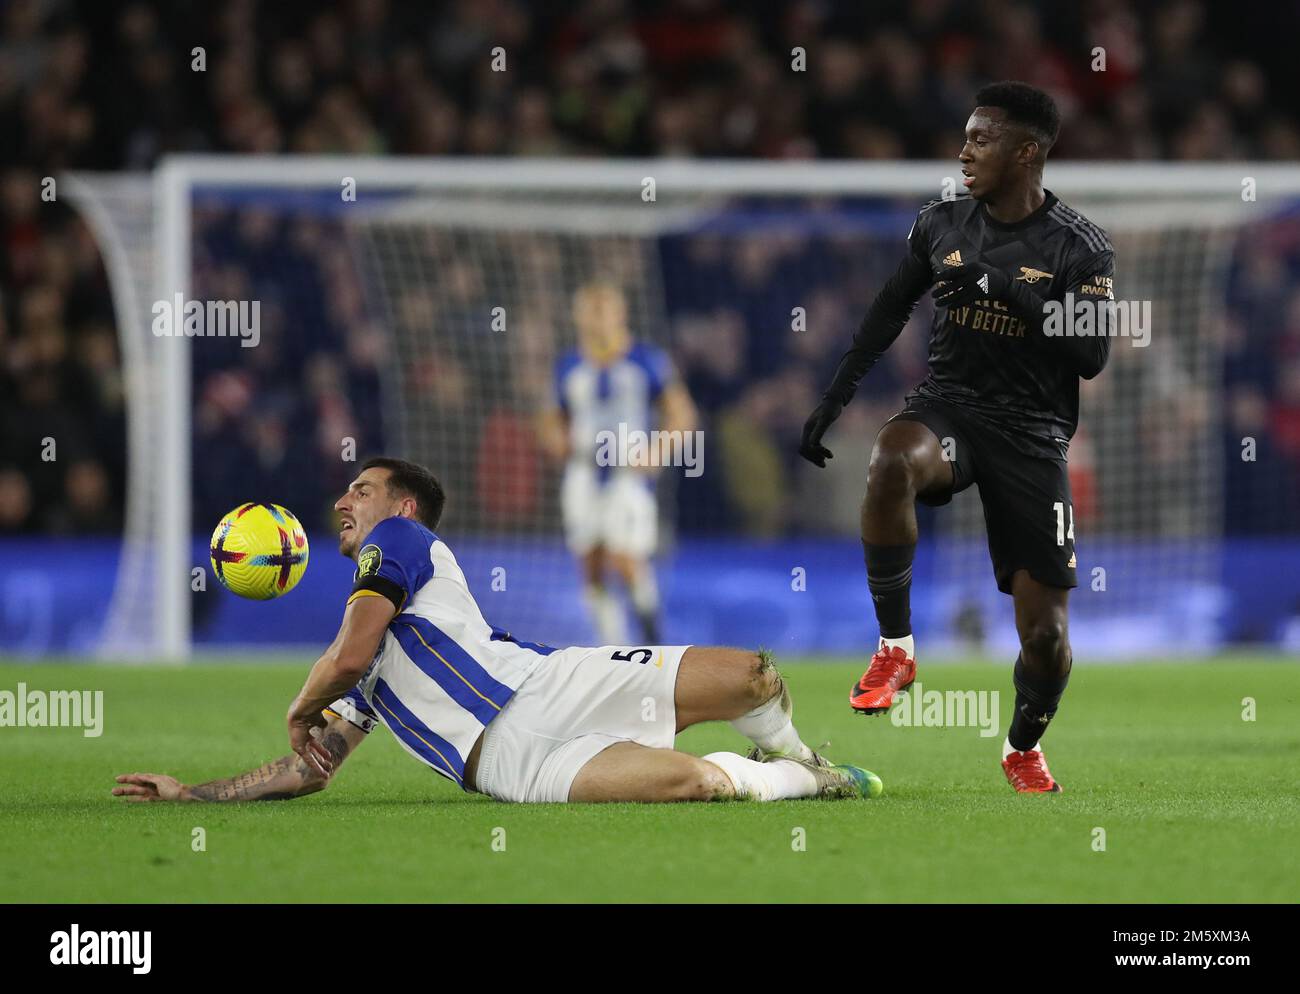 Brighton and Hove, UK. 31st Dec, 2022. Lewis Dunk of Brighton tackles Eddie Nketiah of Arsenal during the Premier League match at the AMEX Stadium, Brighton and Hove. Picture credit should read: Paul Terry/Sportimage Credit: Sportimage/Alamy Live News Stock Photo